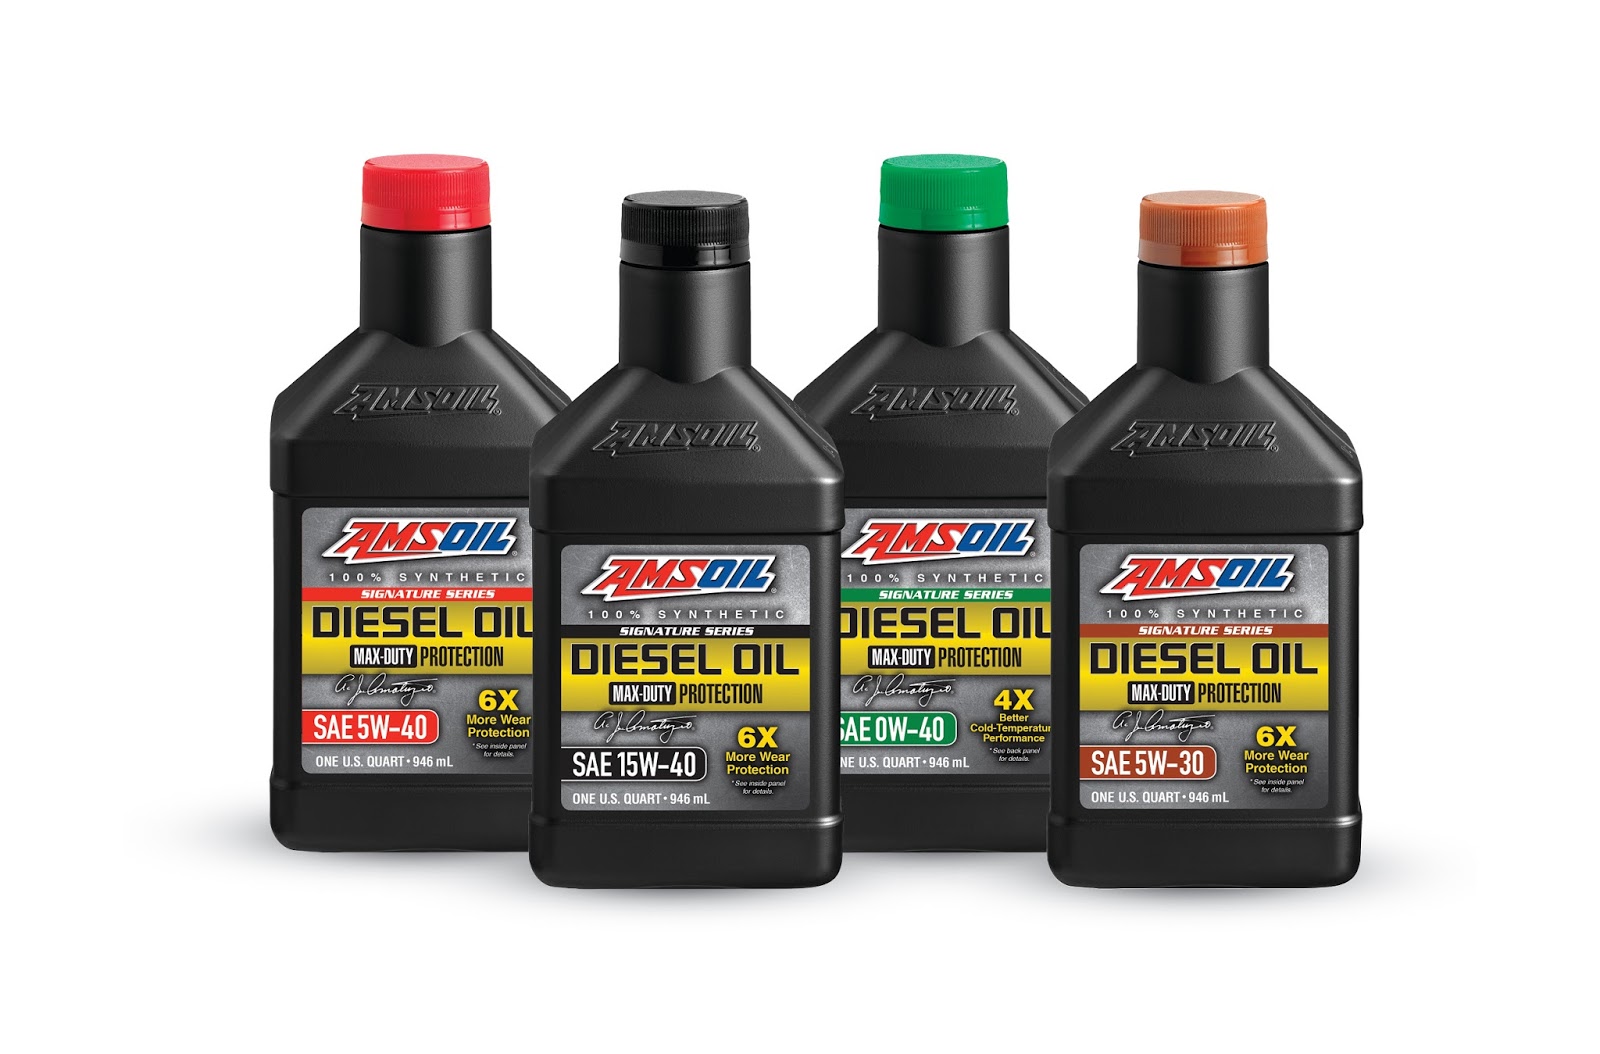 Amsoil signature series synthetic. AMSOIL 5w40 Diesel. AMSOIL Heavy-Duty Synthetic Diesel Oil SAE 5w-40. AMSOIL Signature 5.40. AMSOIL 5w40 дизель.